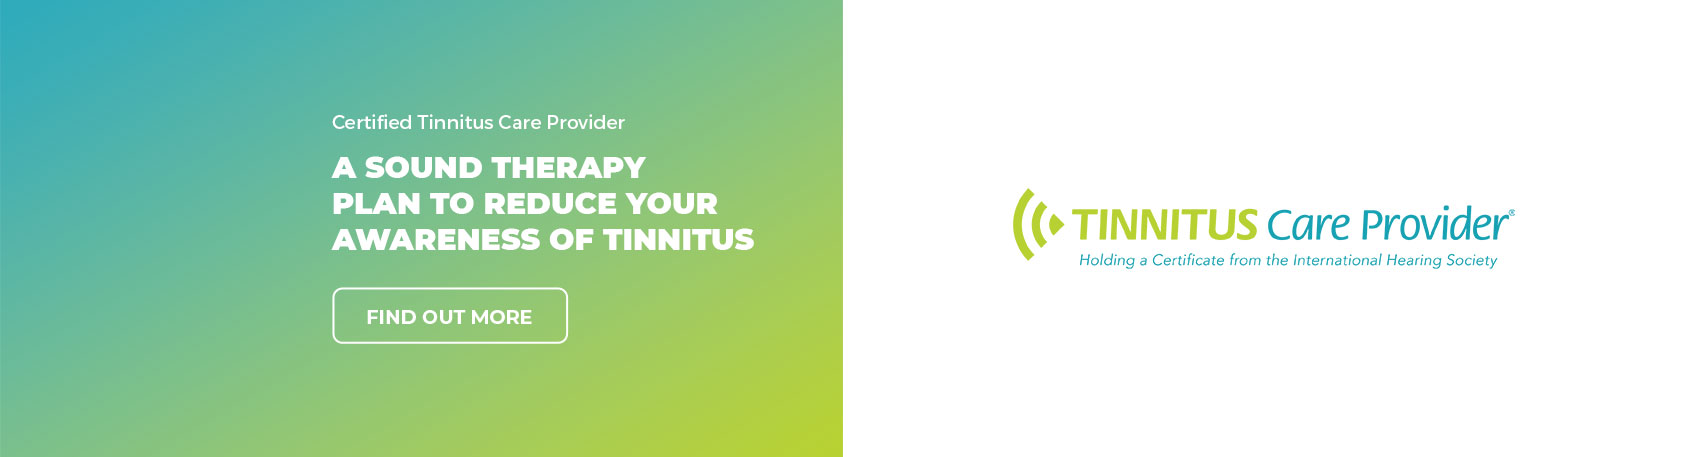 Certified Tinnitus Care Provider Banner - dB Hearing Center